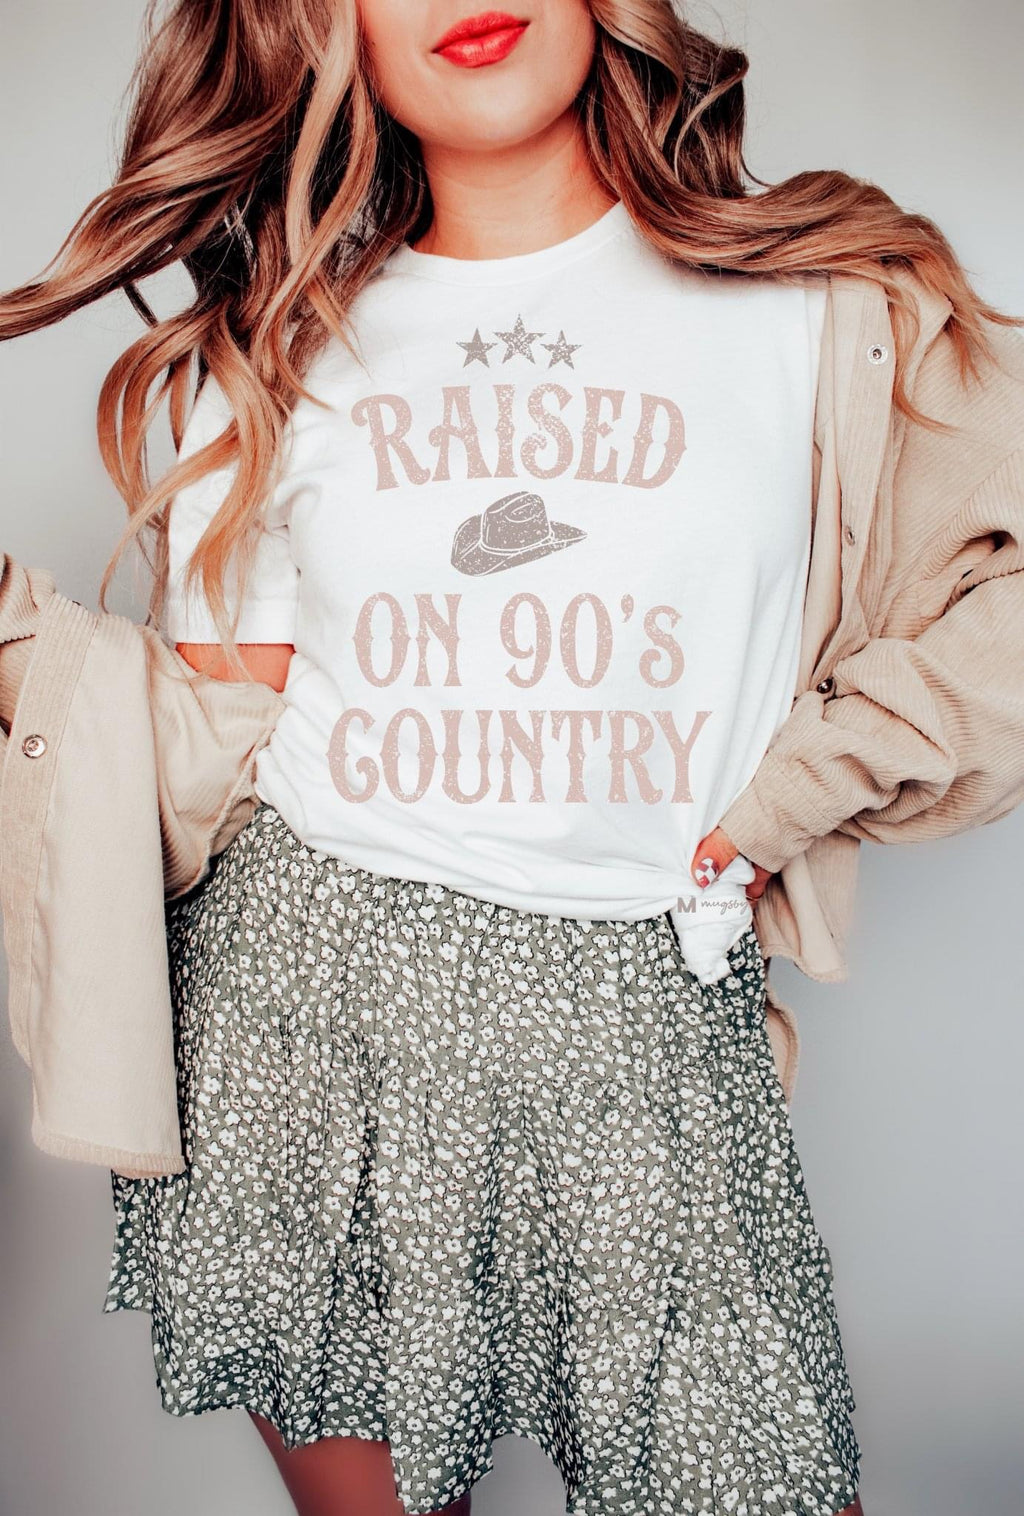 Raised on 90’s Country Tee